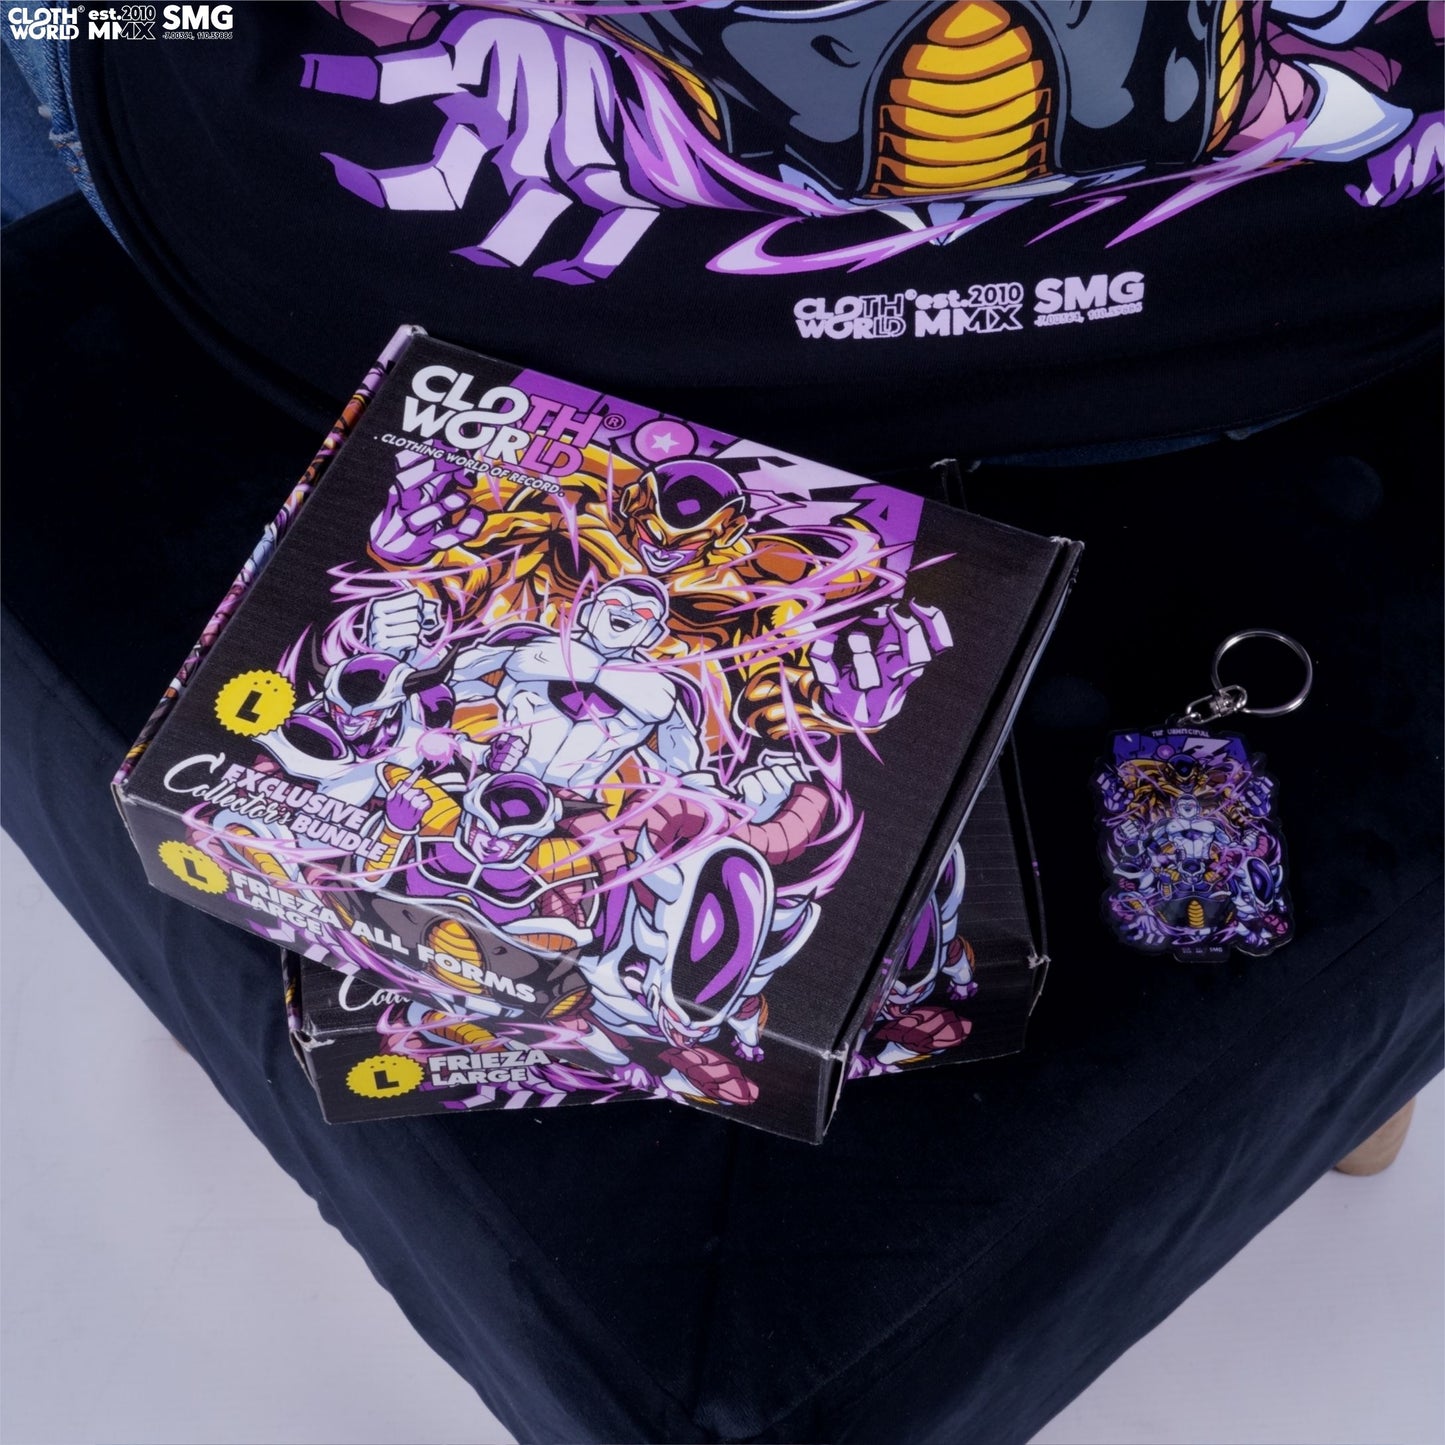 Frieza All Forms T-Shirt